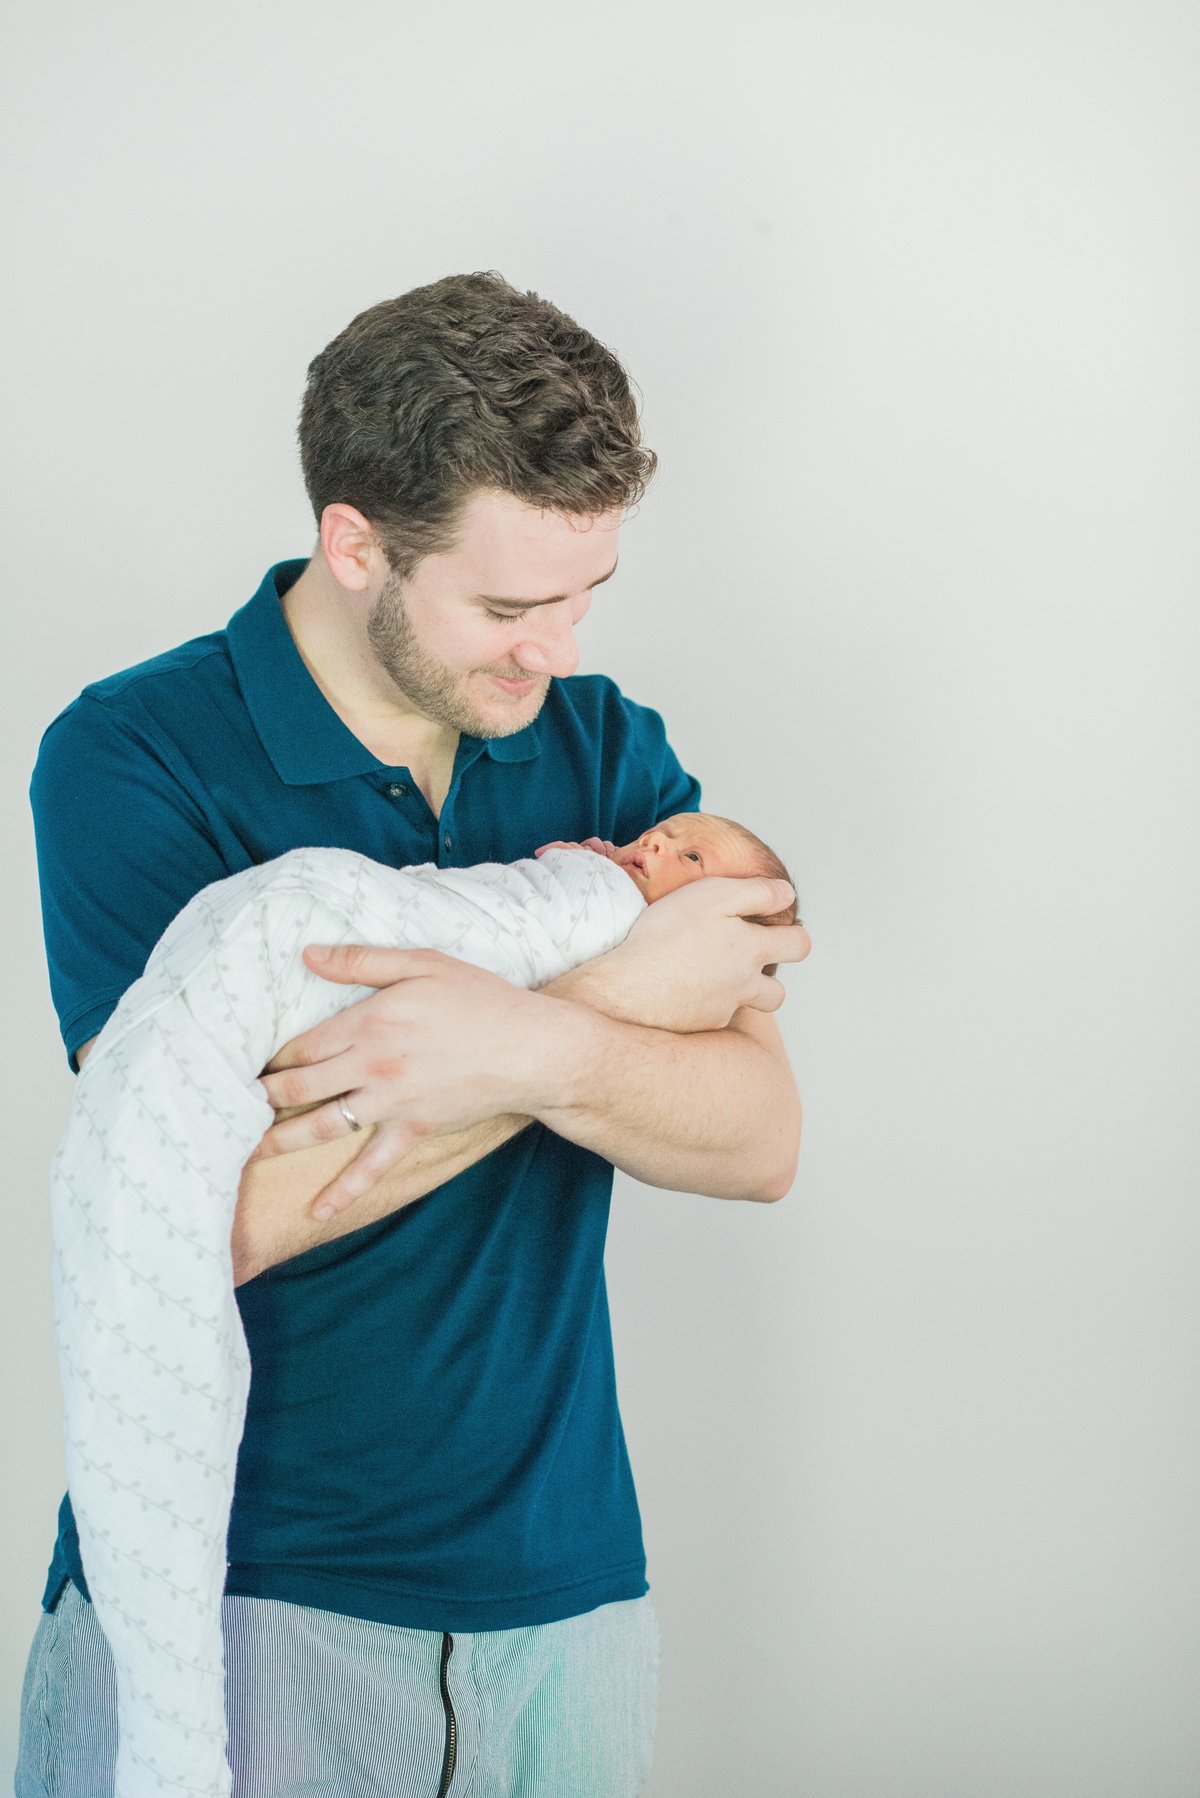 dad holding first son in navy collared shirt and baby in white swaddle